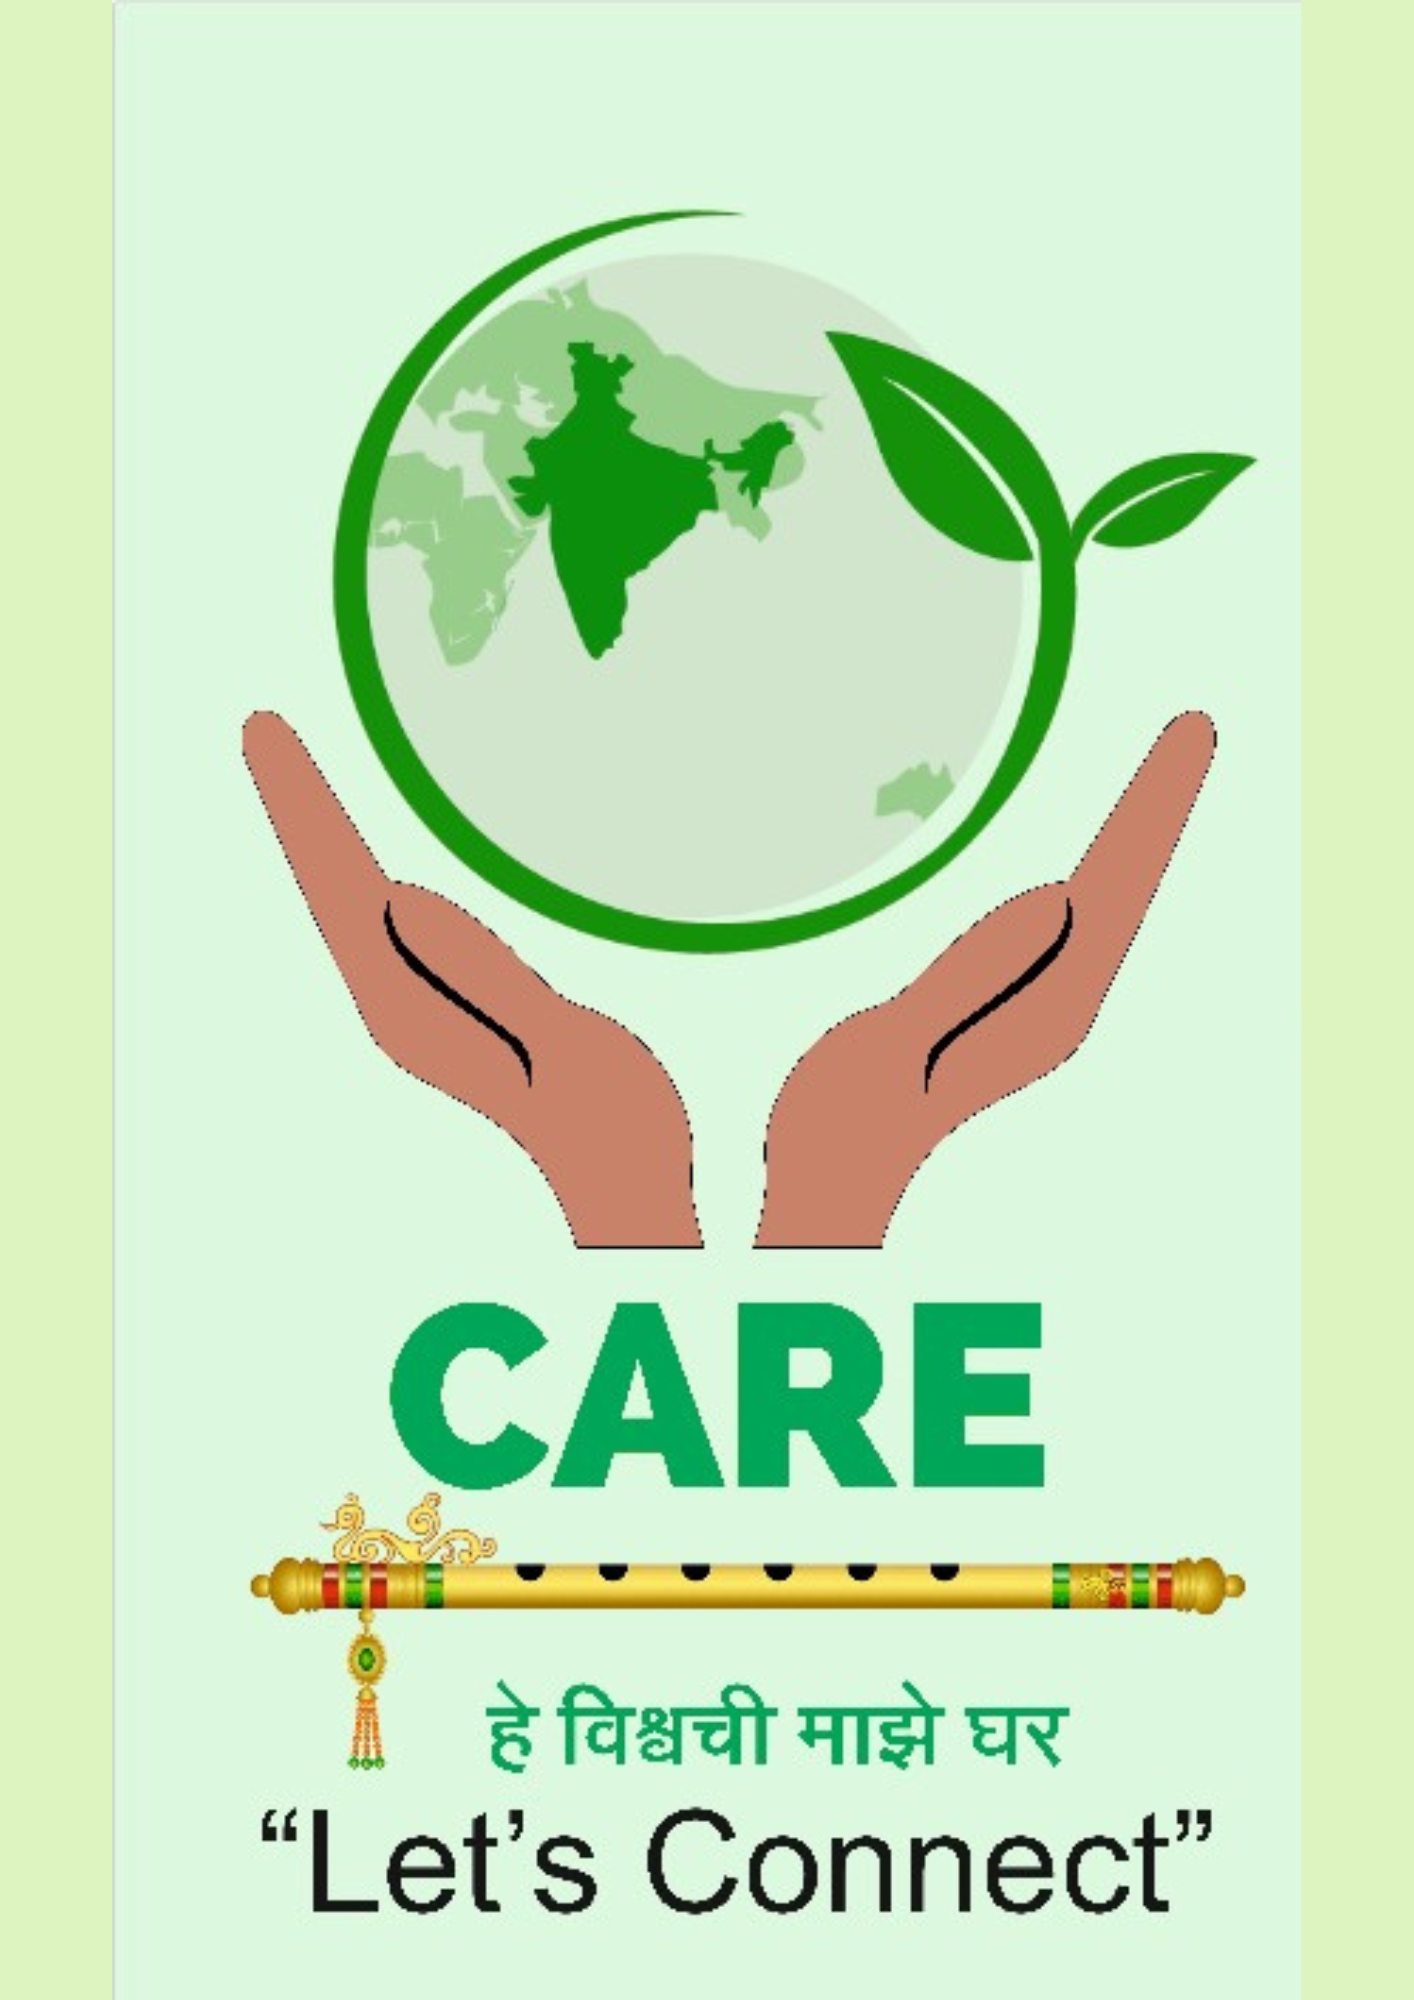 CARE CONSERVATION AND RESTORATION OF ENVIRONMENT